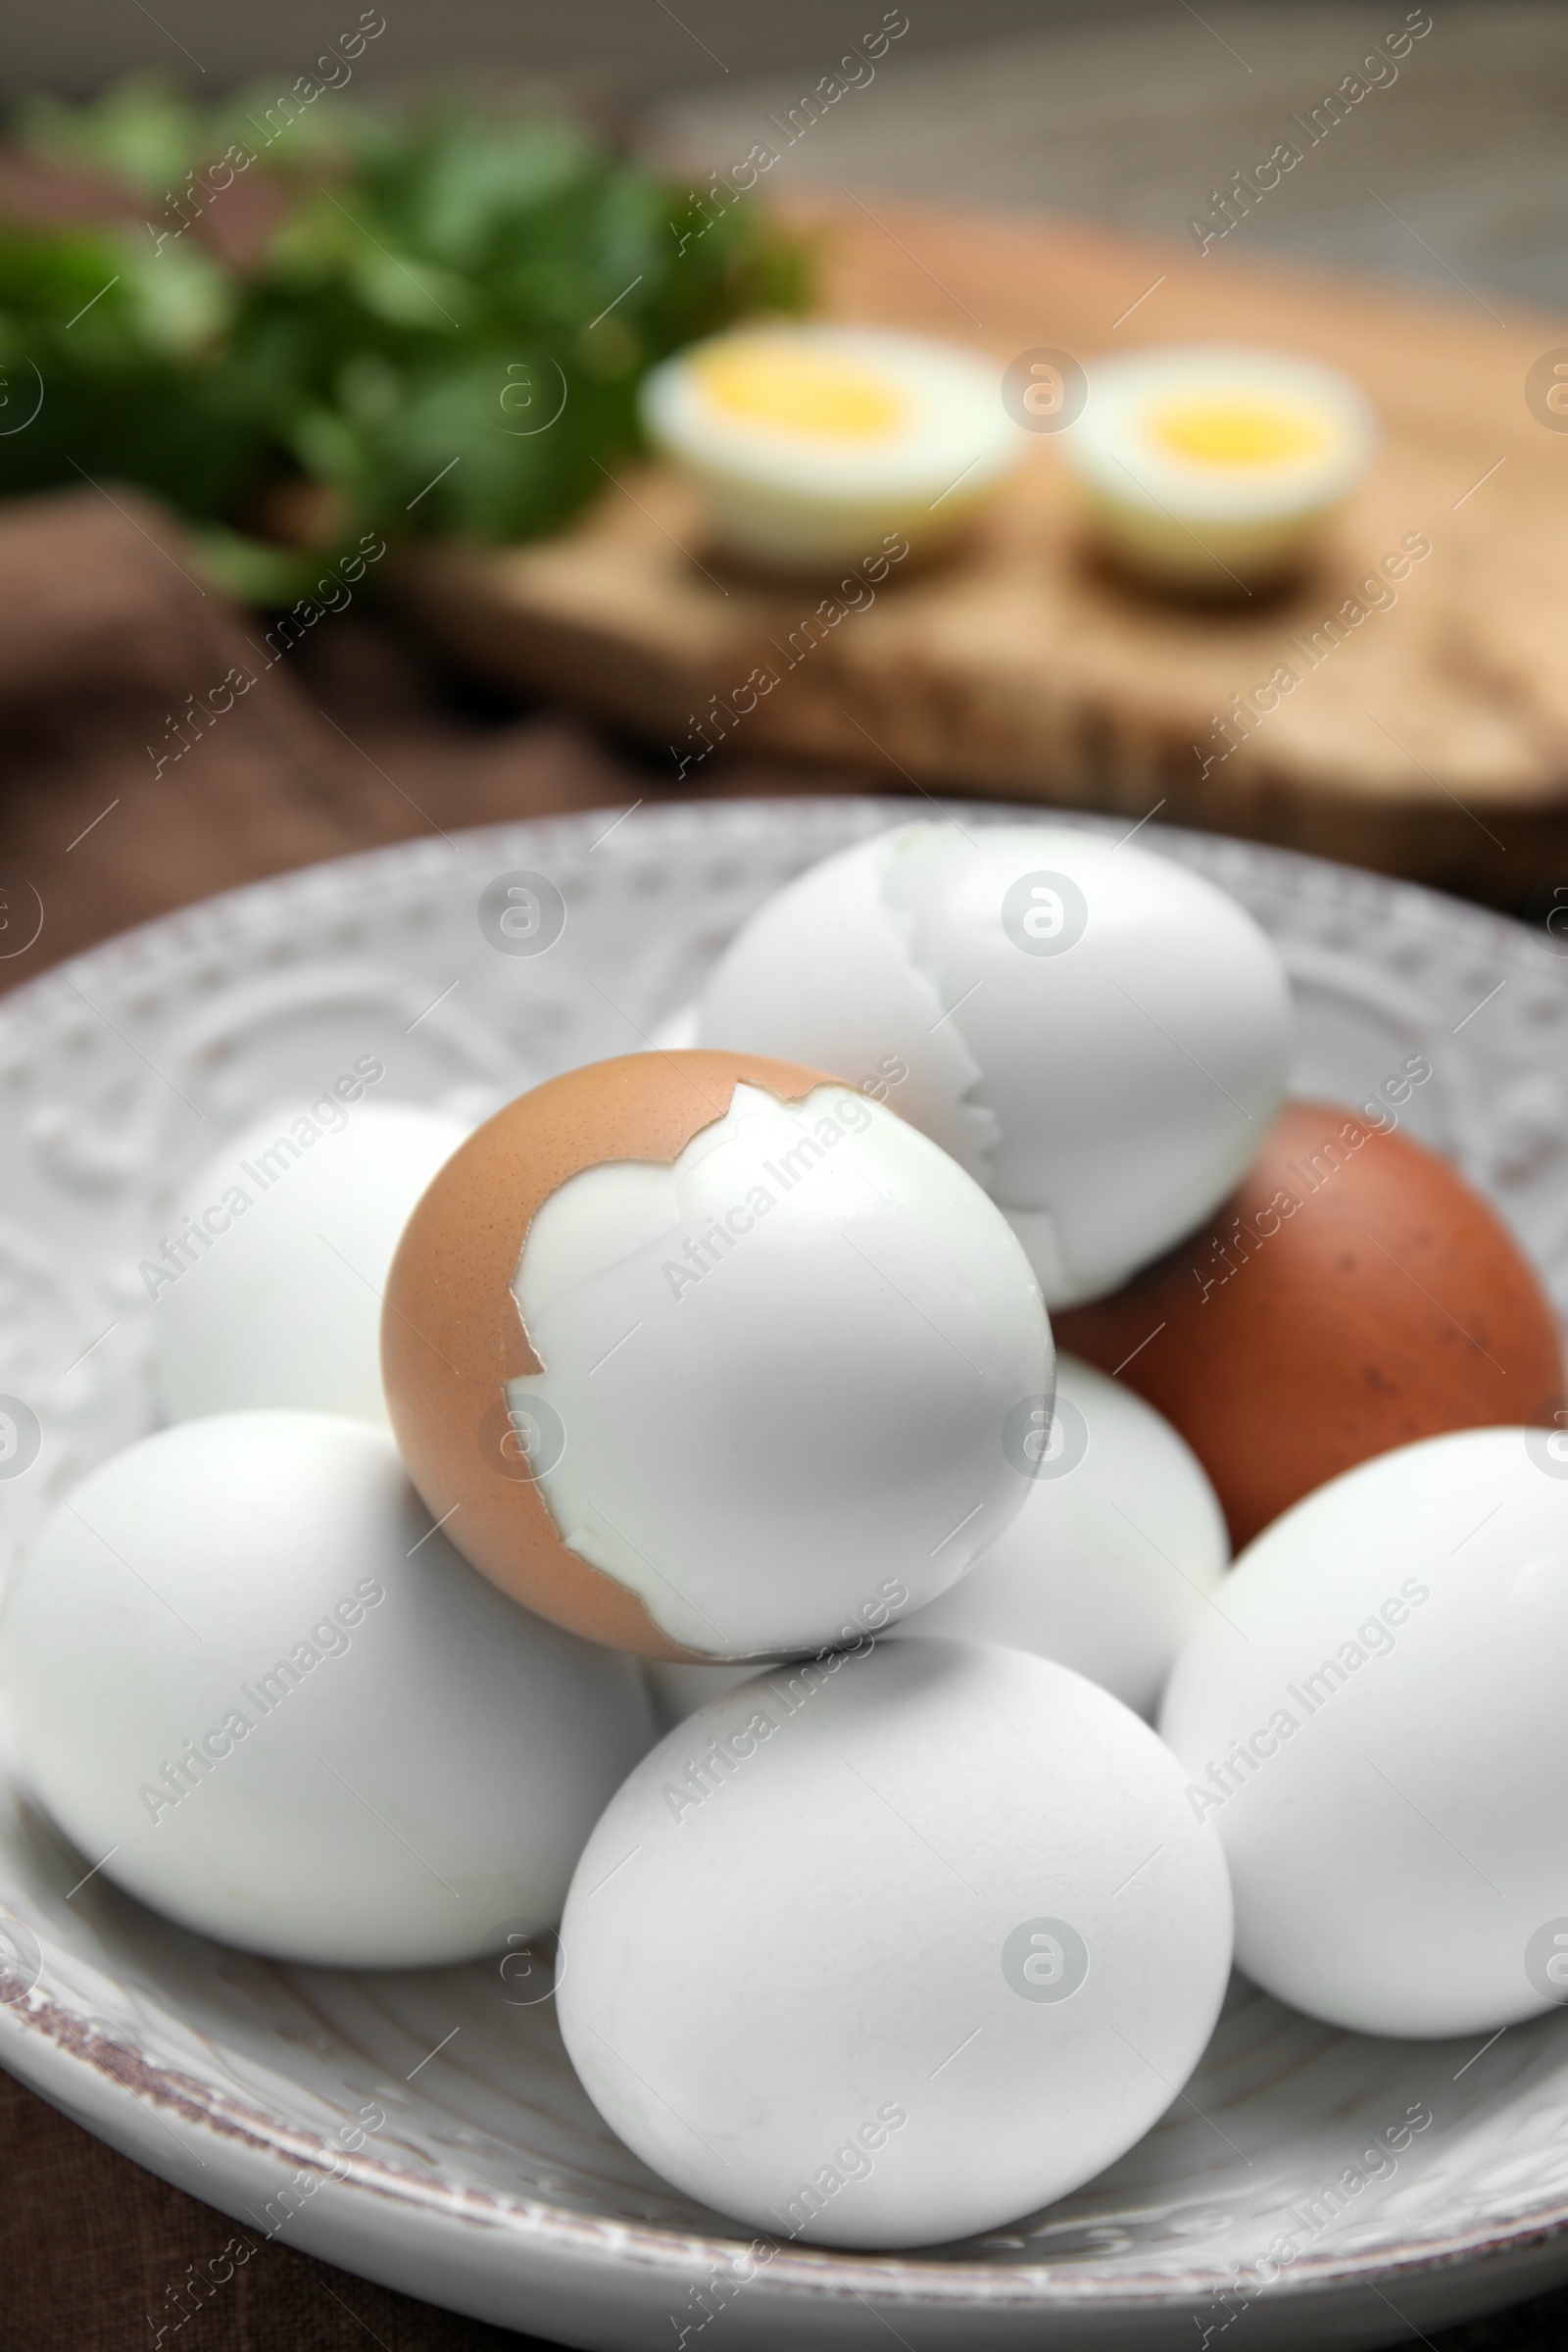 Photo of Many boiled eggs on plate, closeup view